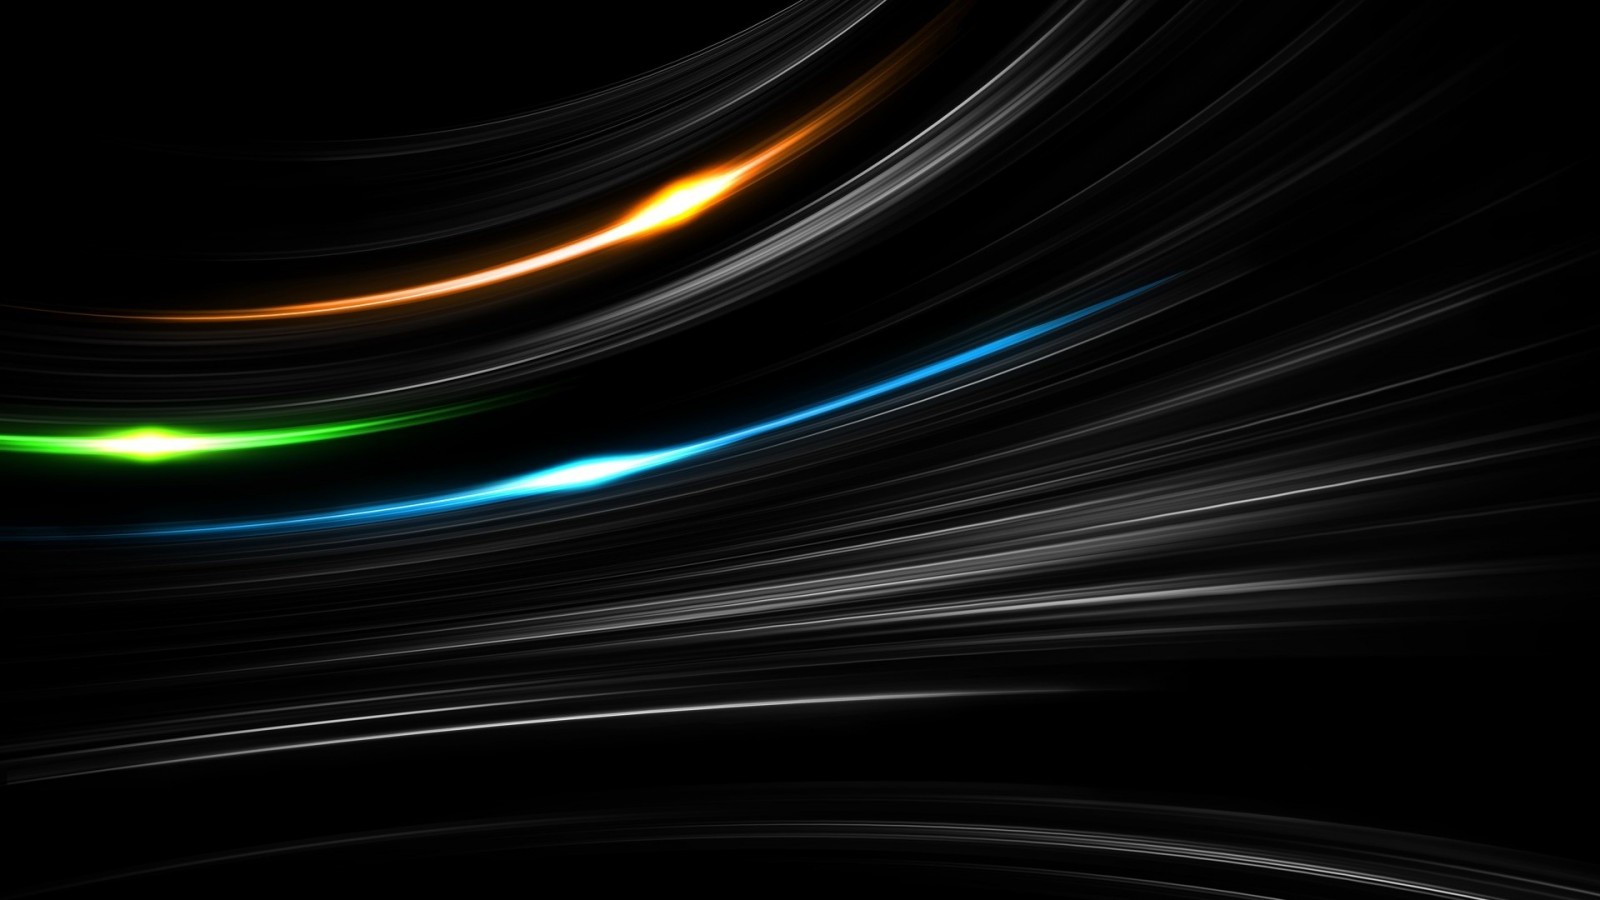 digital art, black background, abstract, space, minimalism, glowing, green, blue, orange, circle, atmosphere, lines, light, wave, shape, line, darkness, screenshot, computer wallpaper, outer space Gallery HD Wallpaper